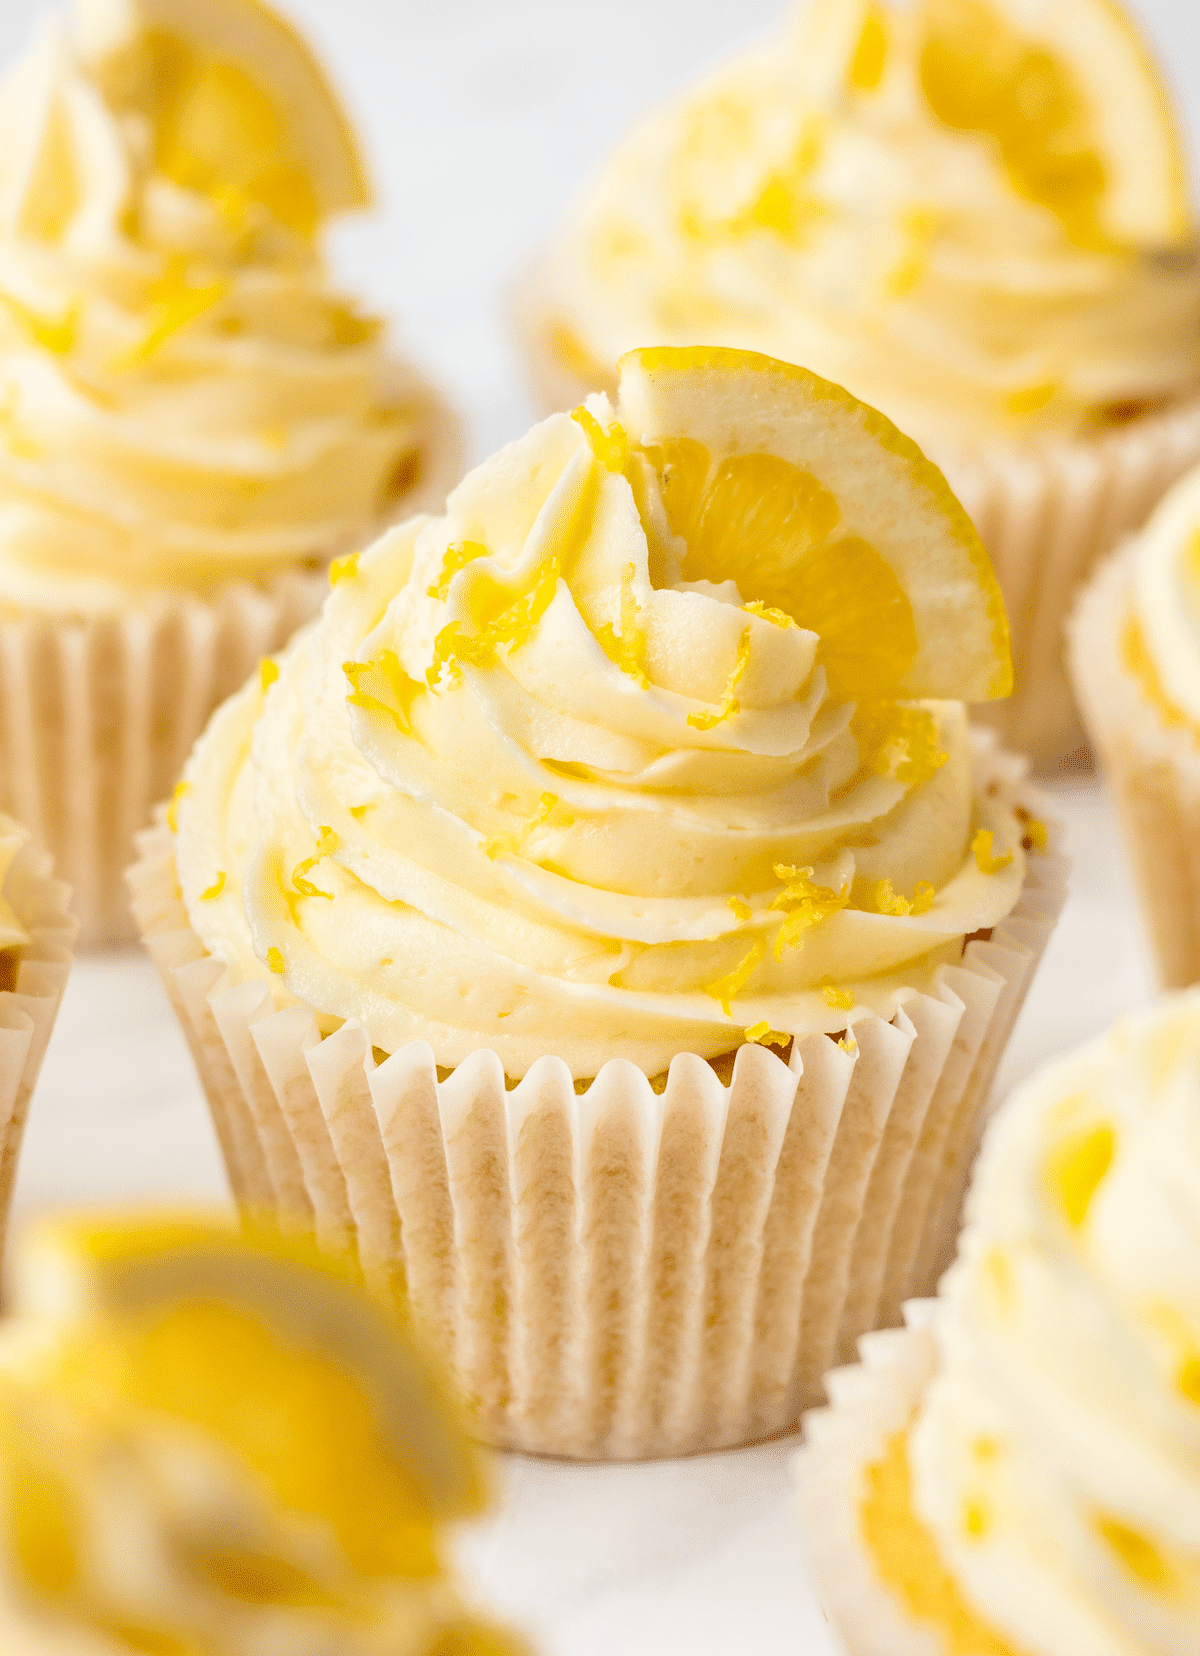 Overhead angled views of lemon cupcakes with lemon buttercream frosting